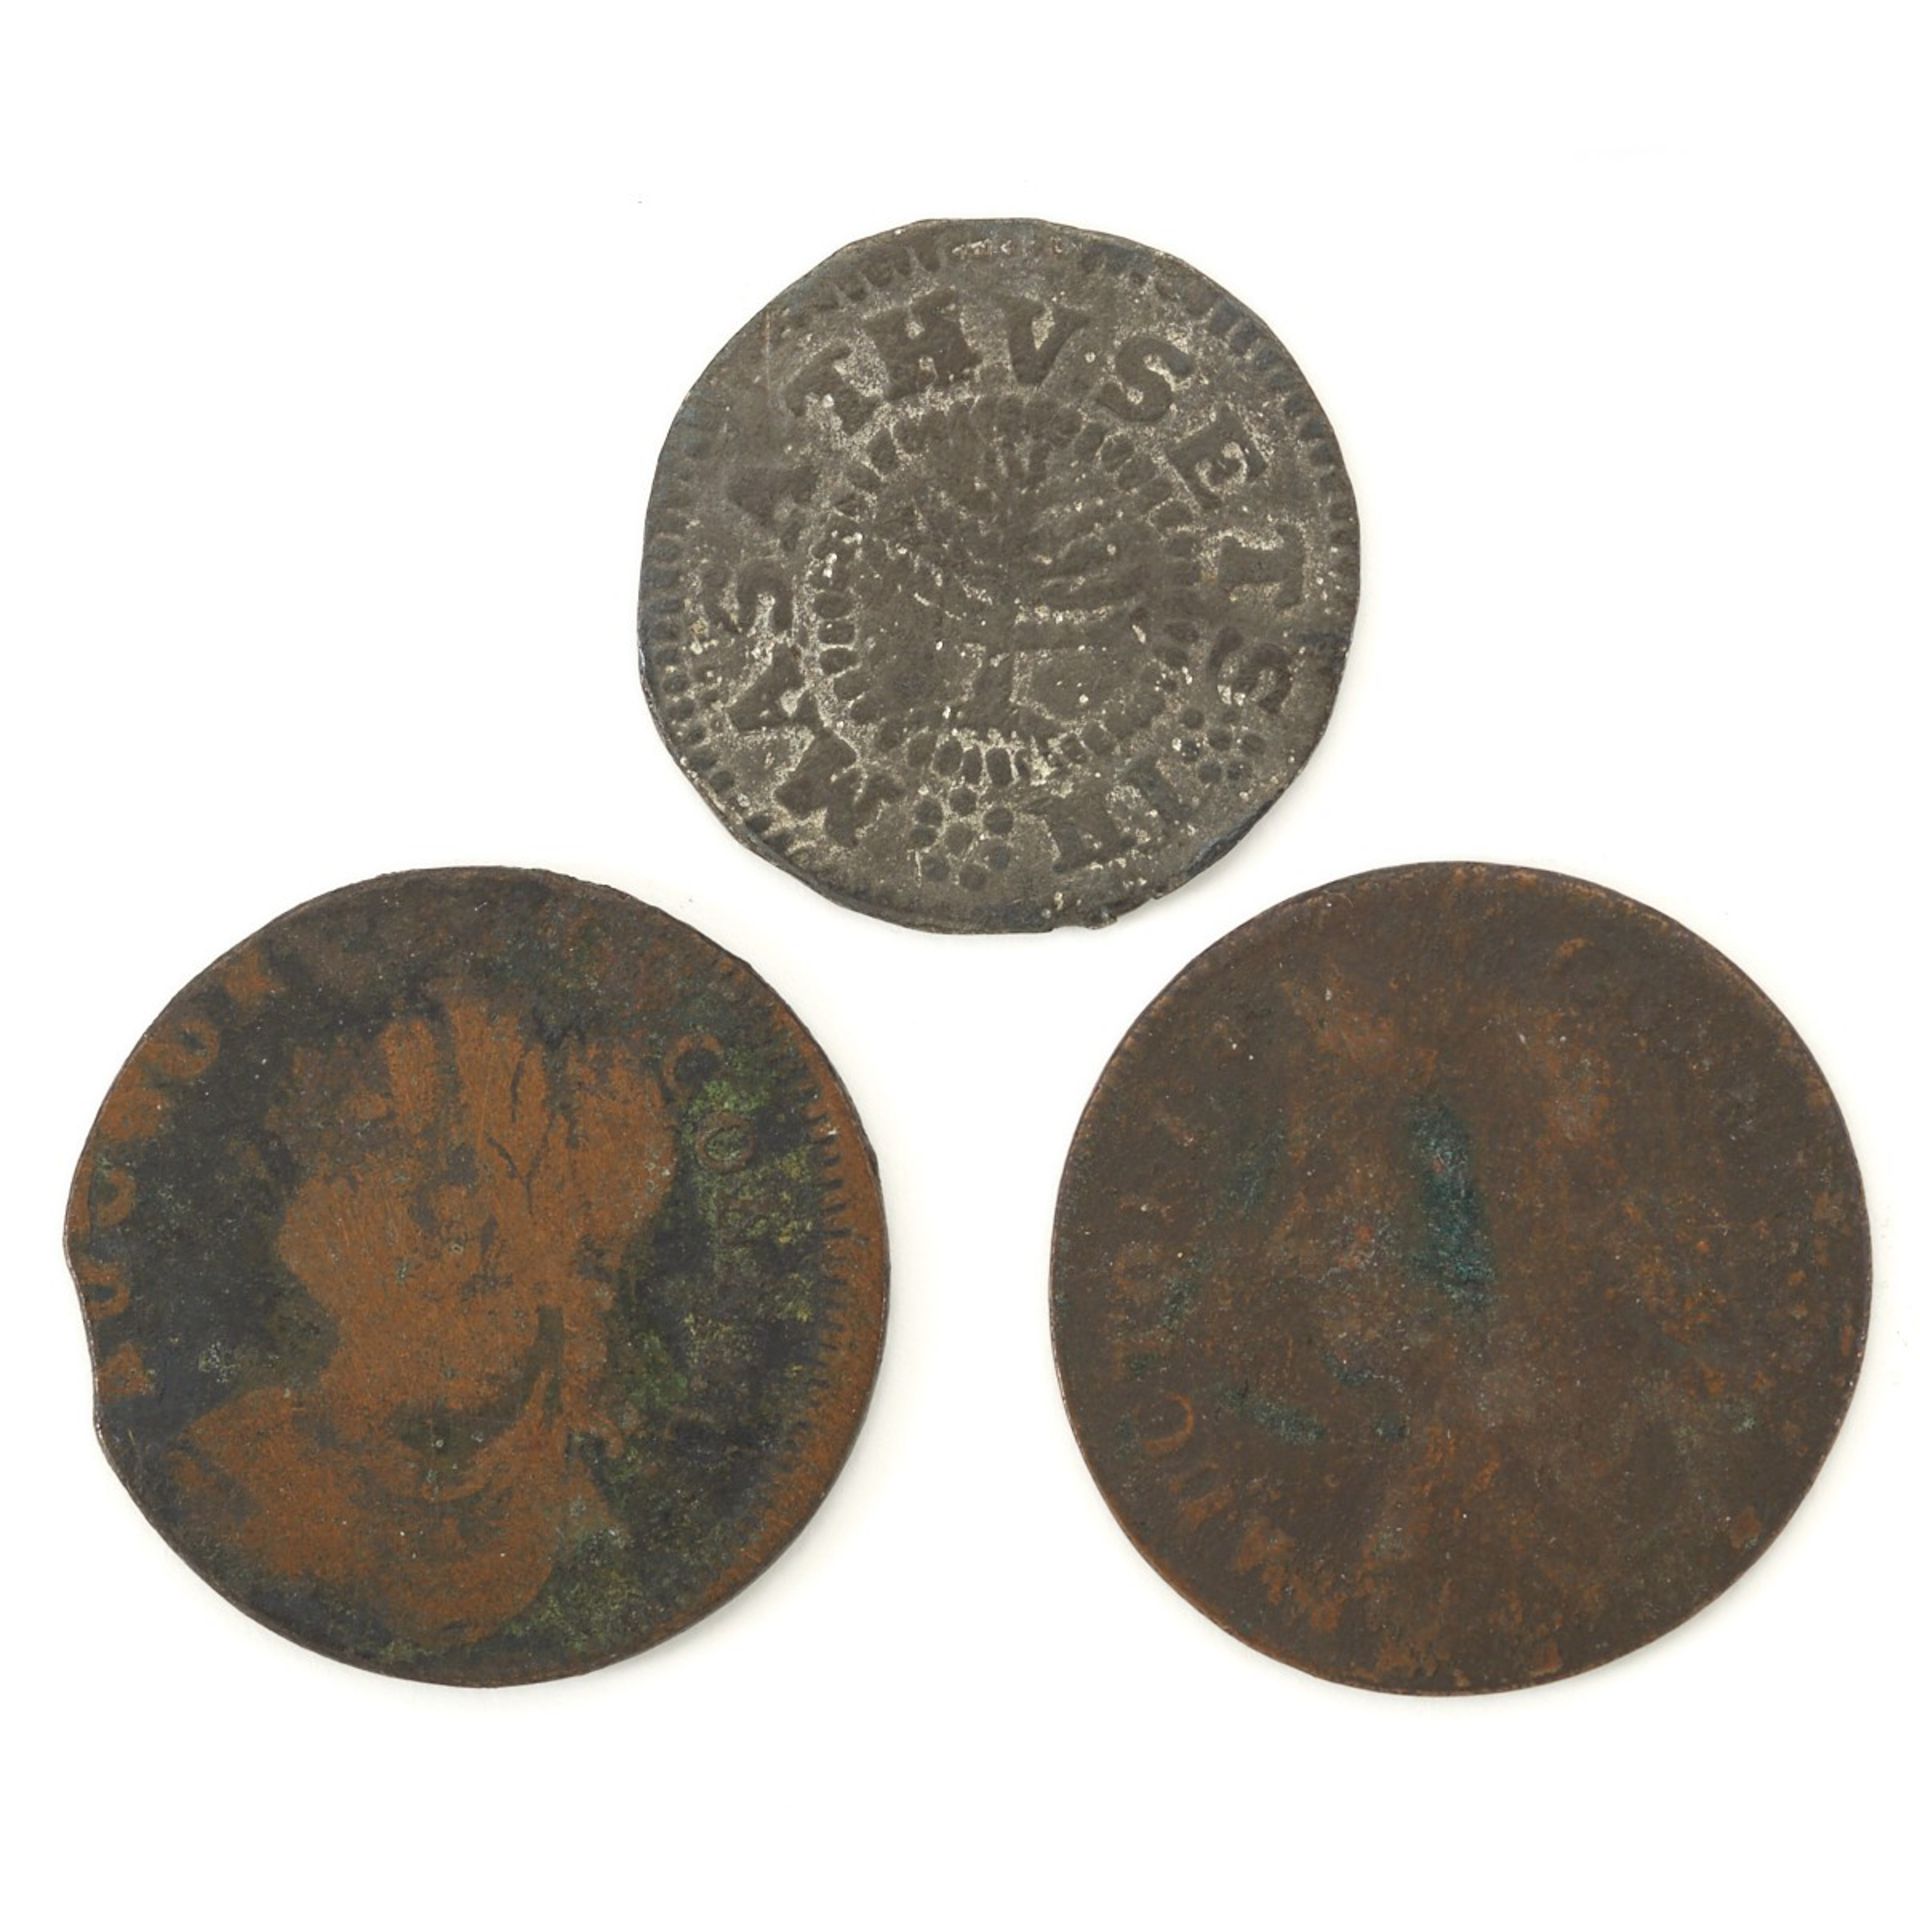 Grp: 3 1652 Pine Tree Shilling and 2 Tokens 1787